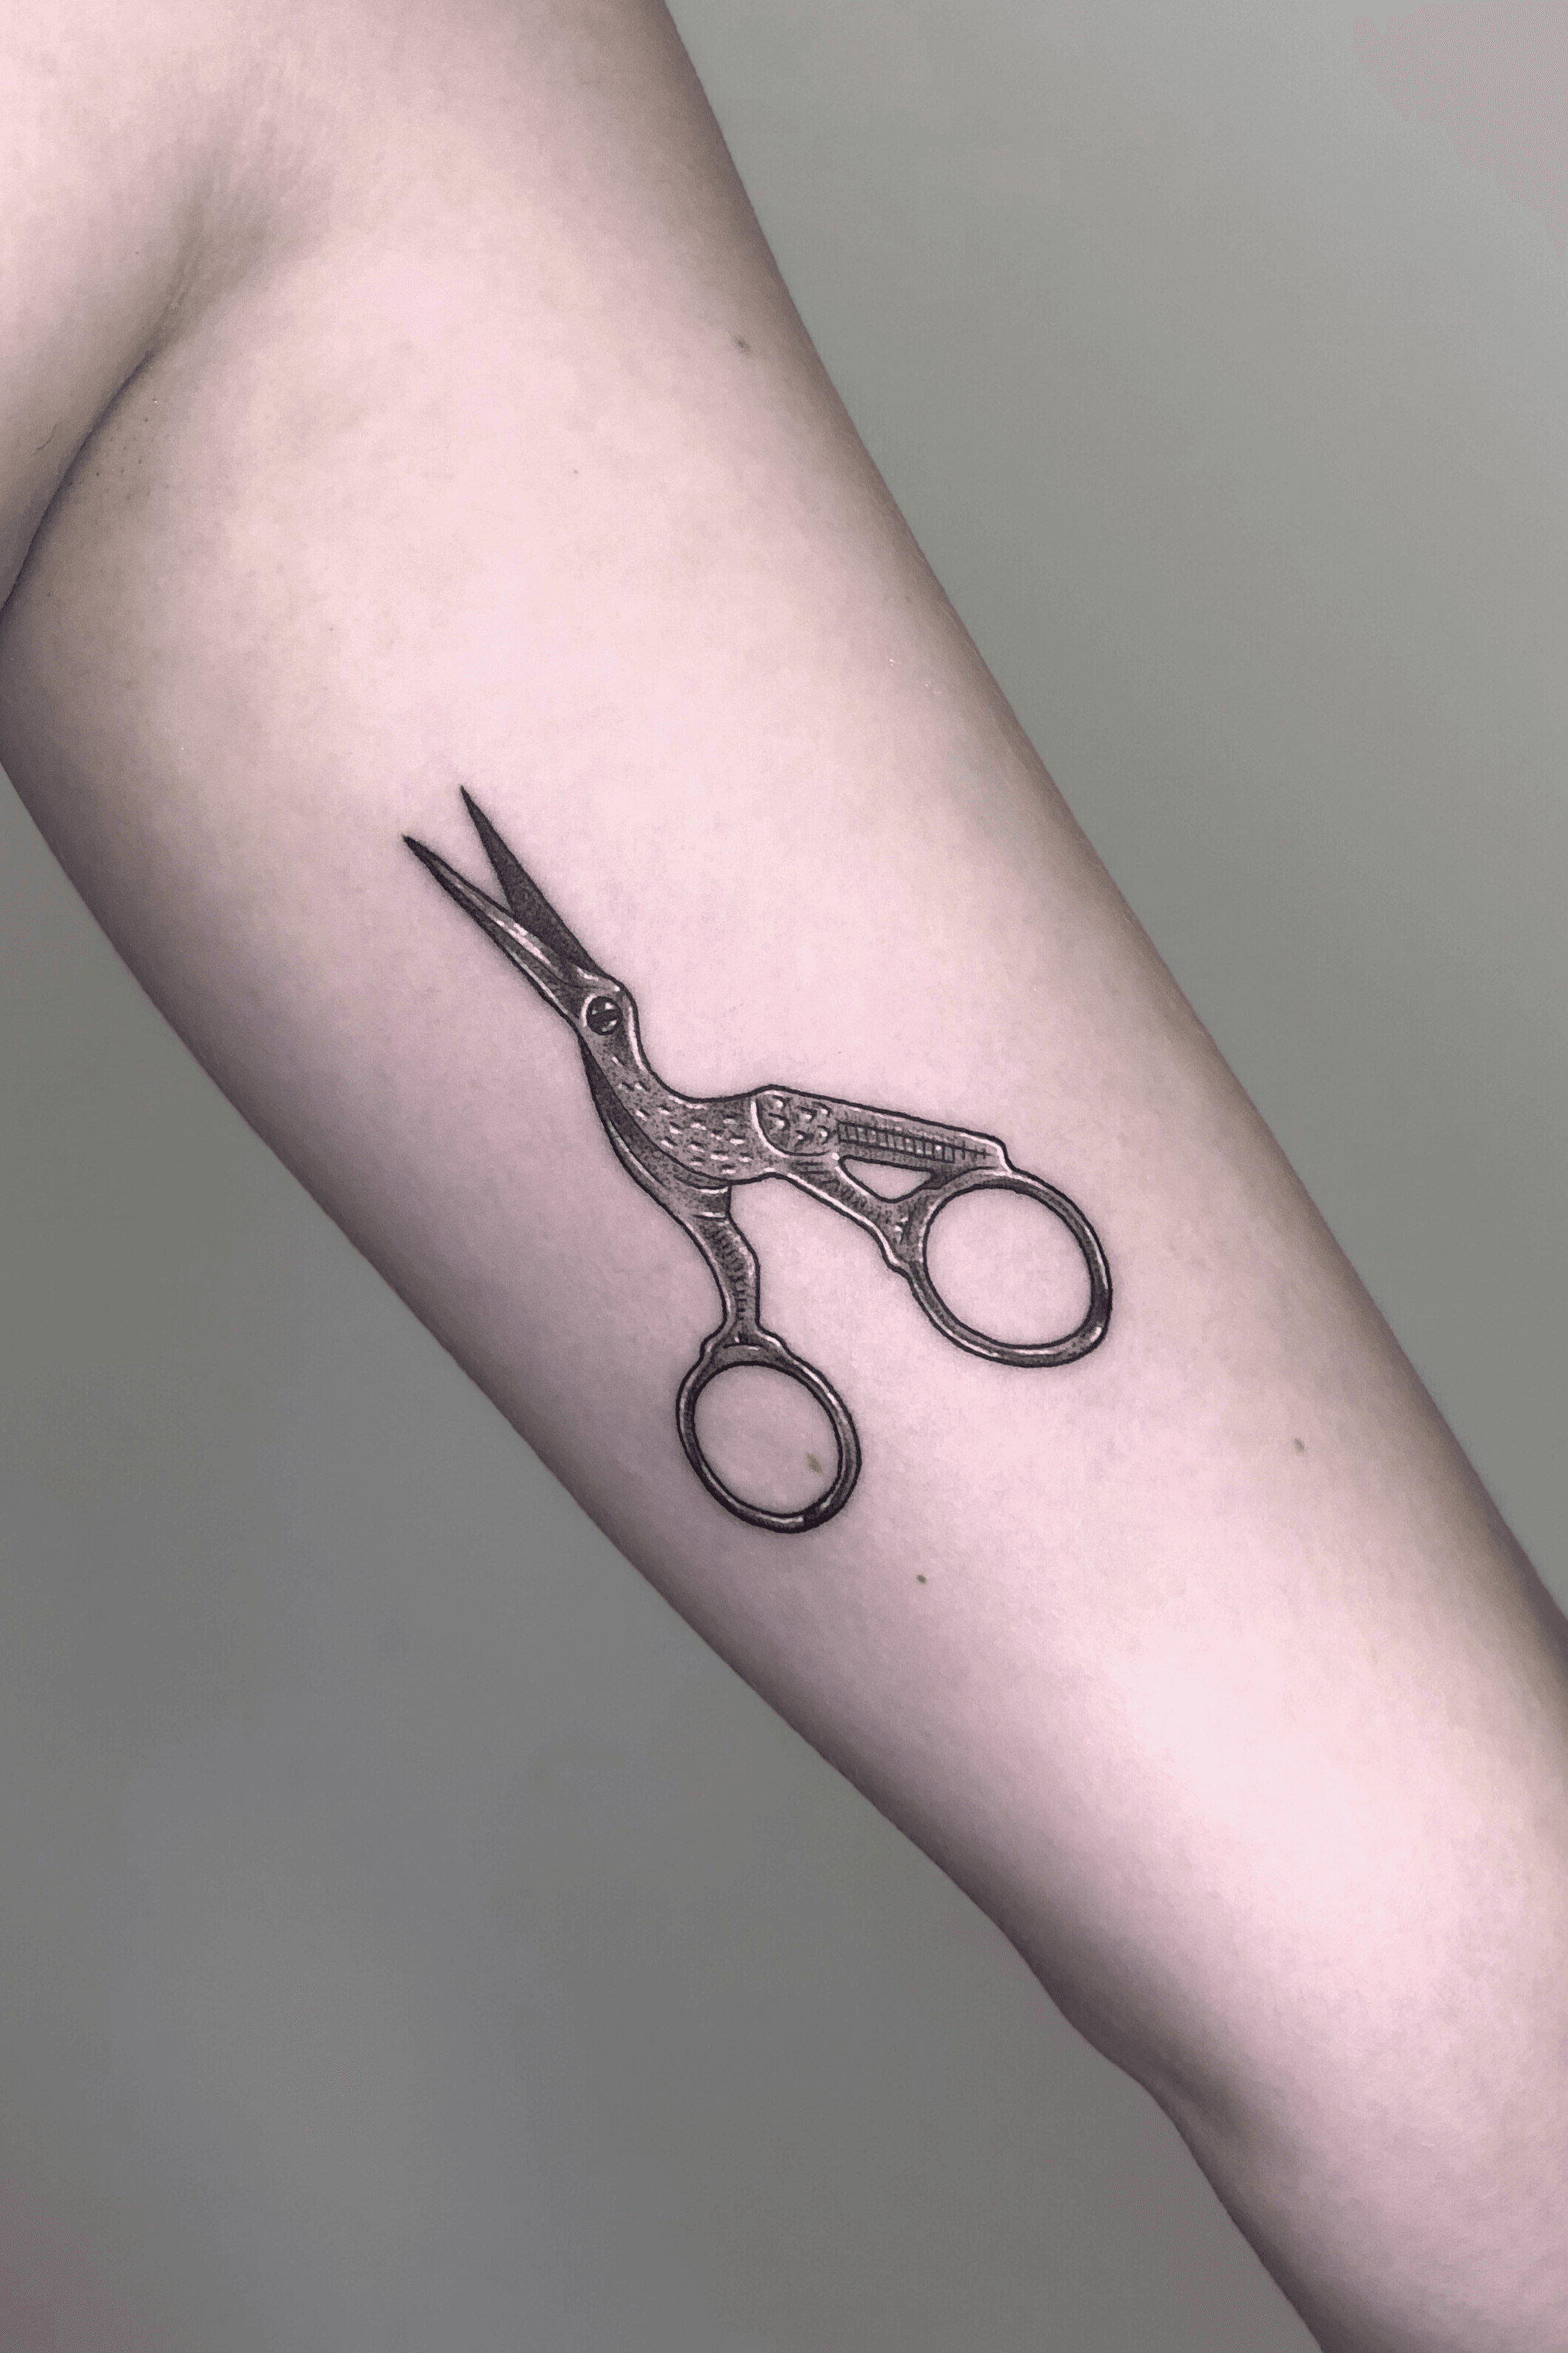 I got a tattoo of cranestork scissors today to celebrate my love of  embroidery  rEmbroidery